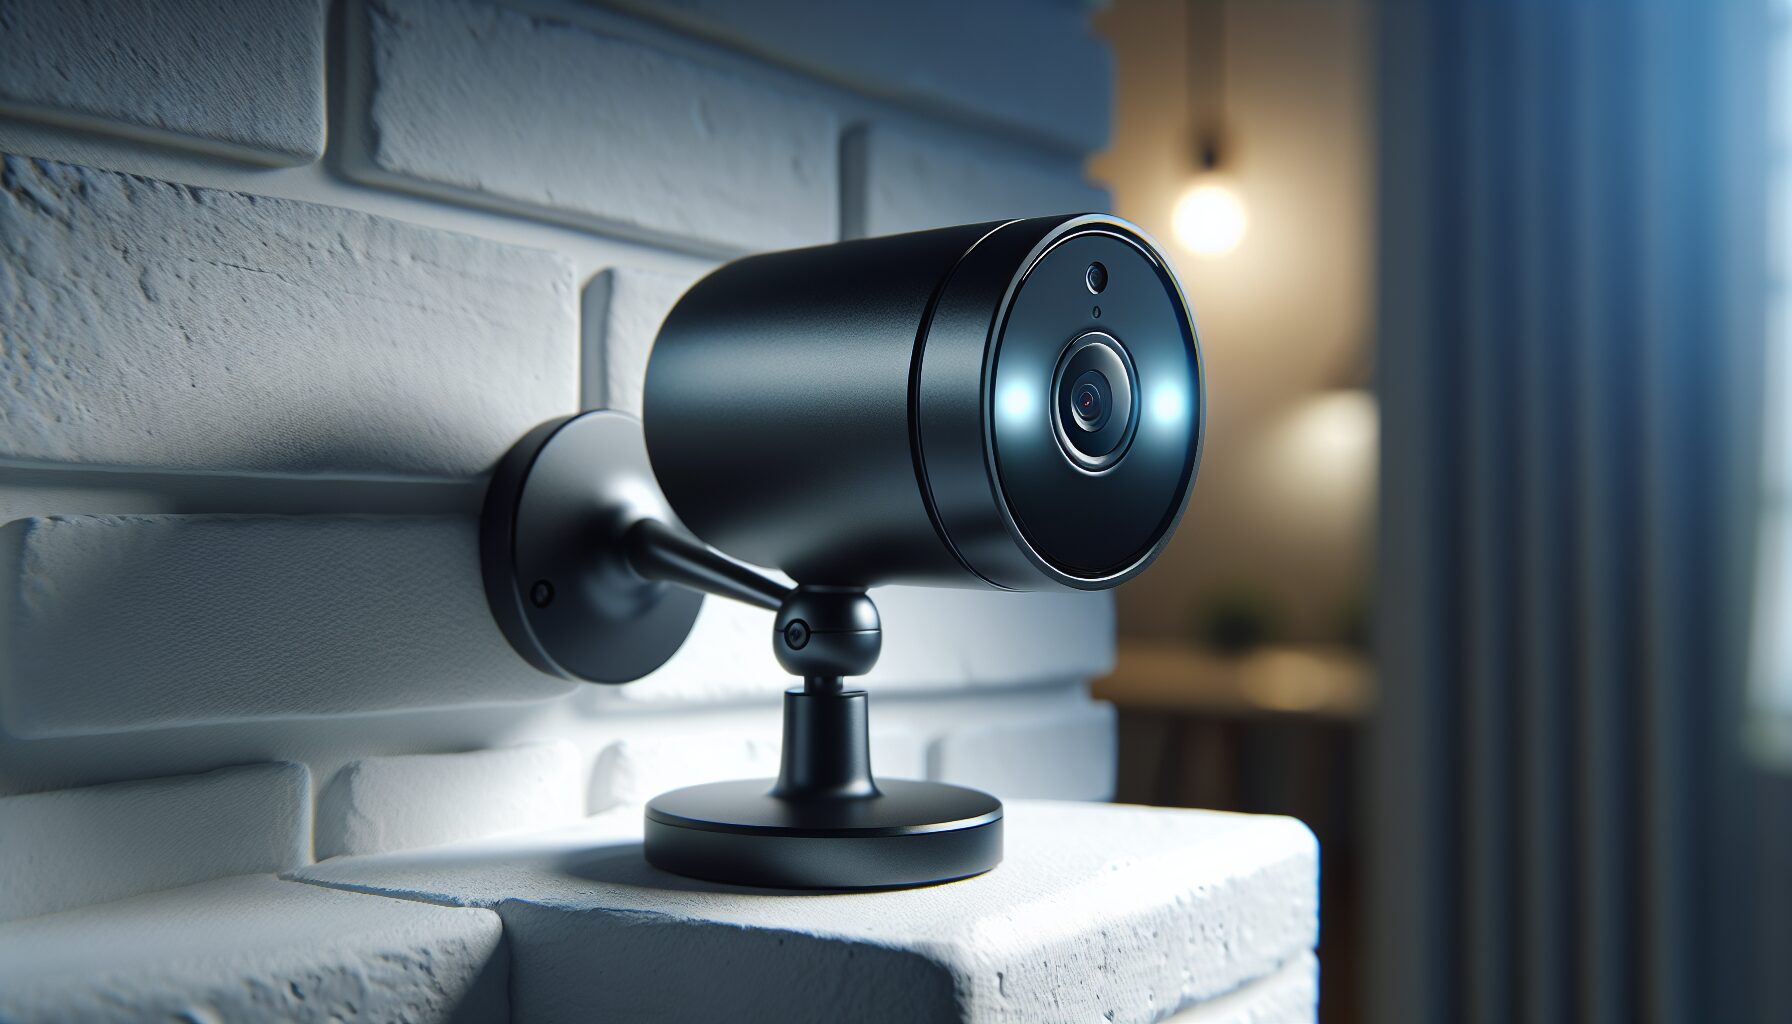 A modern wireless security CCTV camera systems with night vision